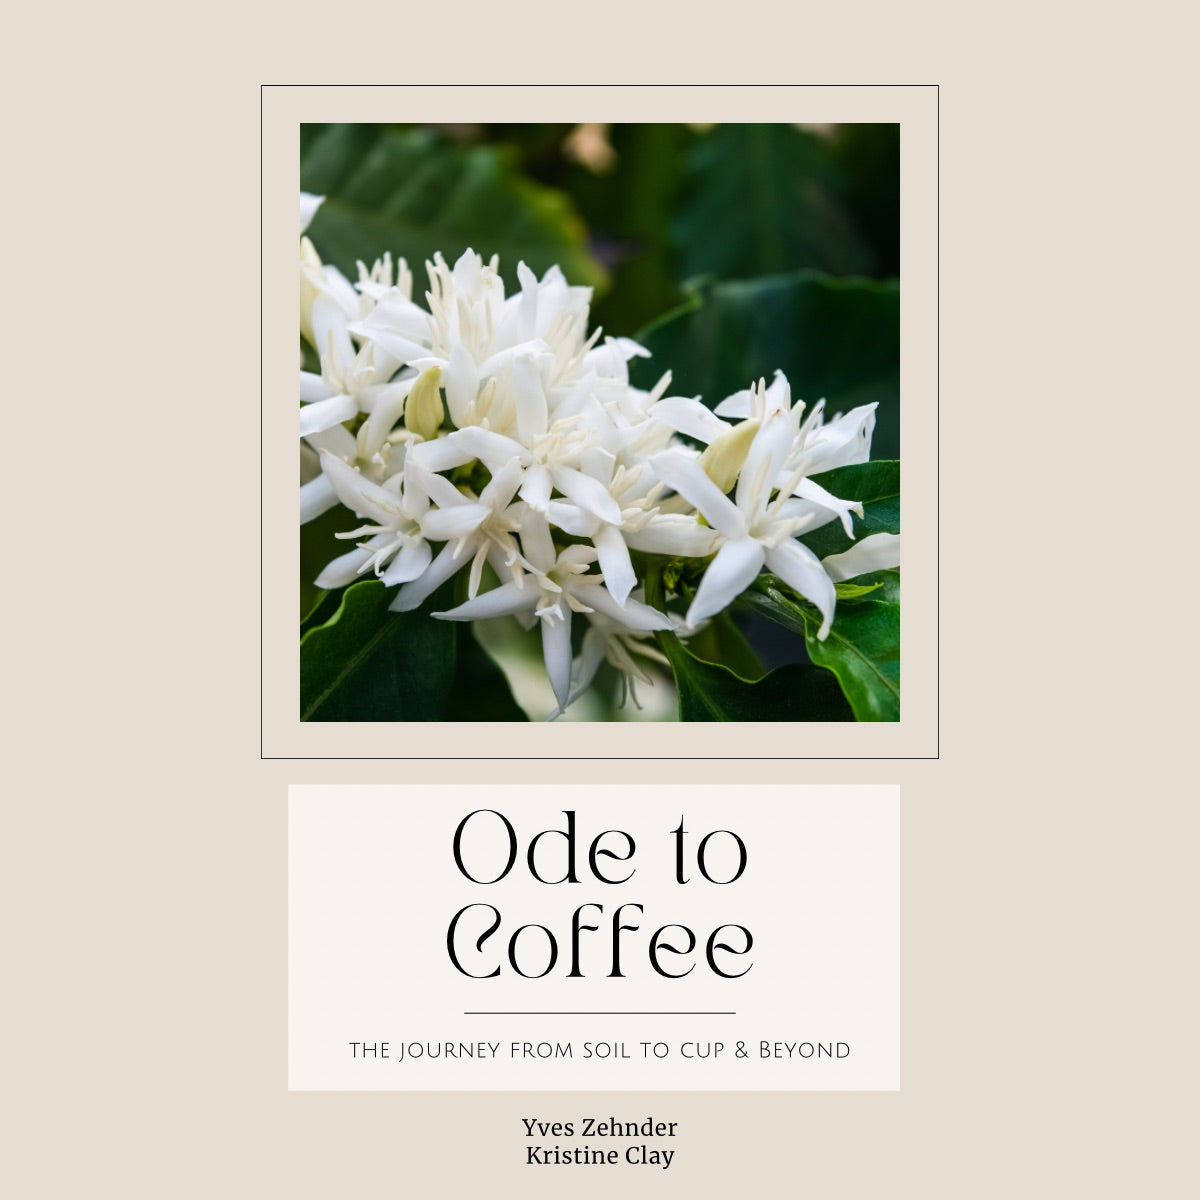 Ode to Coffee: The Journey from Soil to Cup & Beyond by Sierra y Cielo